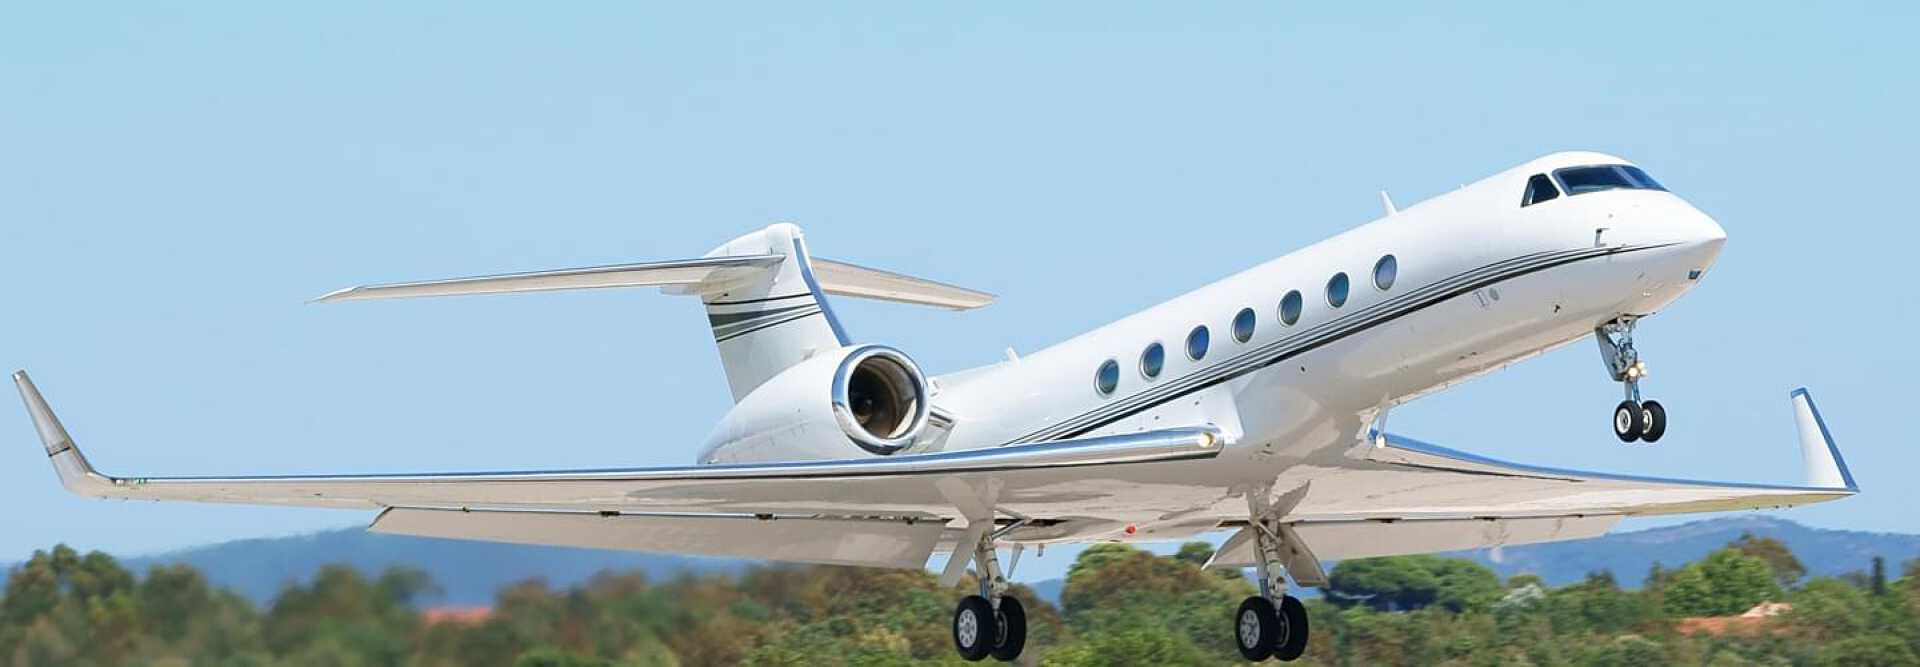 Long Range Business Jet Gulfstream GV to charter for private aviation flights with LunaJets for exceptional range and maximum cruise speed